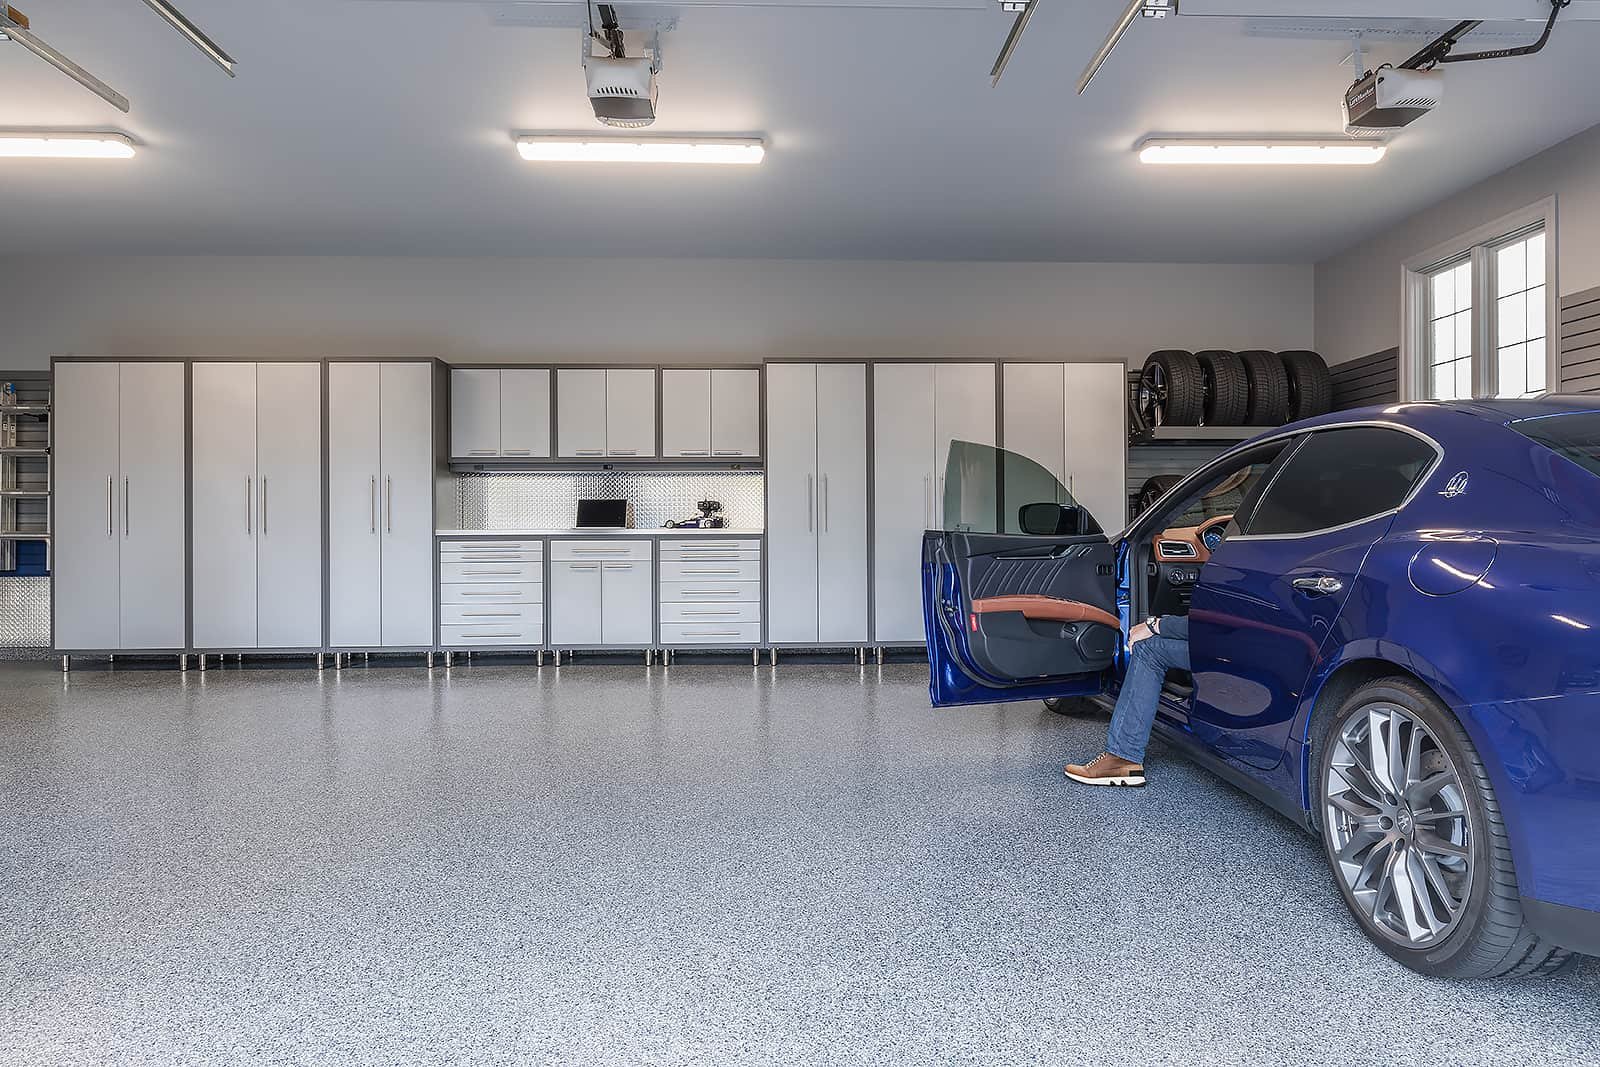 Man in winter coat stepping out of blue vehicle in large 3-car garage with garage cabinets.